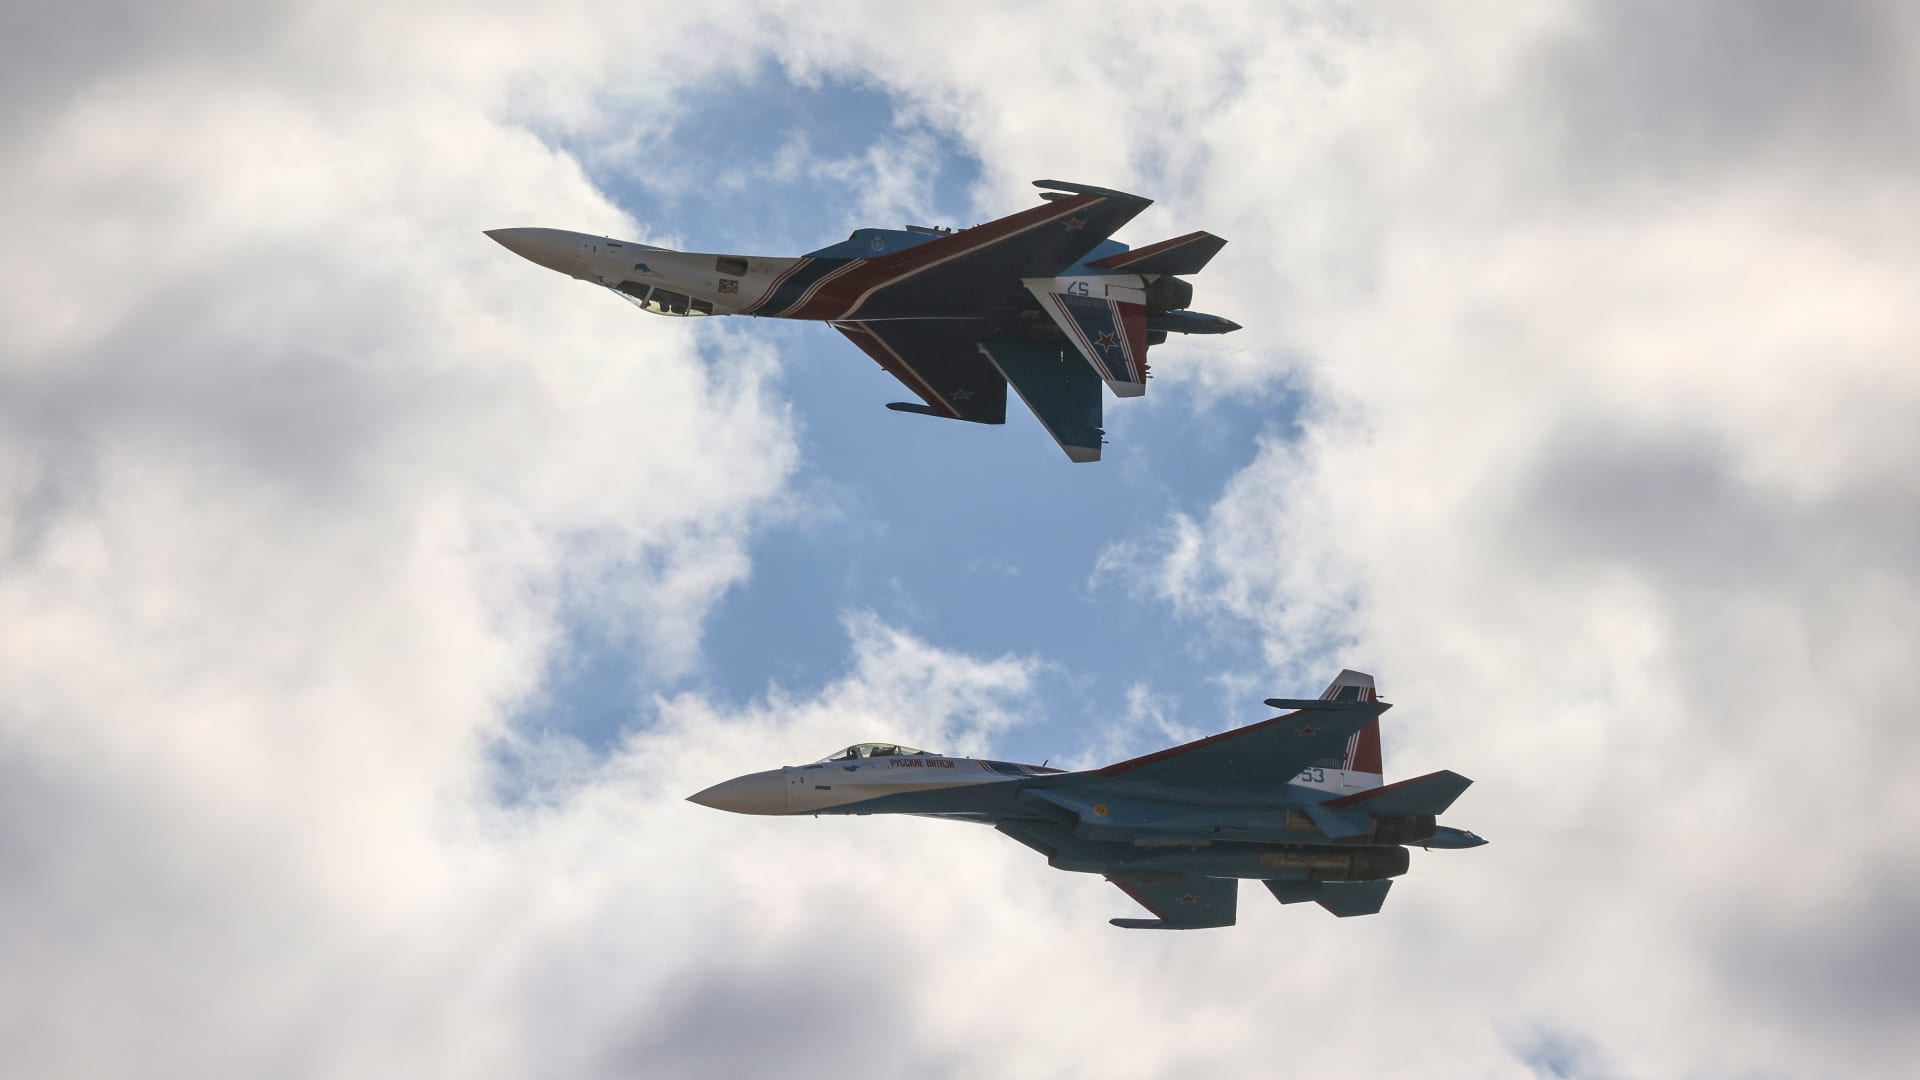 The Russian Knights aerobatic unit fly Sukhoi Su-35S fighter jets during a display at the MAKS International Aviation and Space Salon at Zhukovsky International Airport in Moscow, Russia, on July 22, 2021.